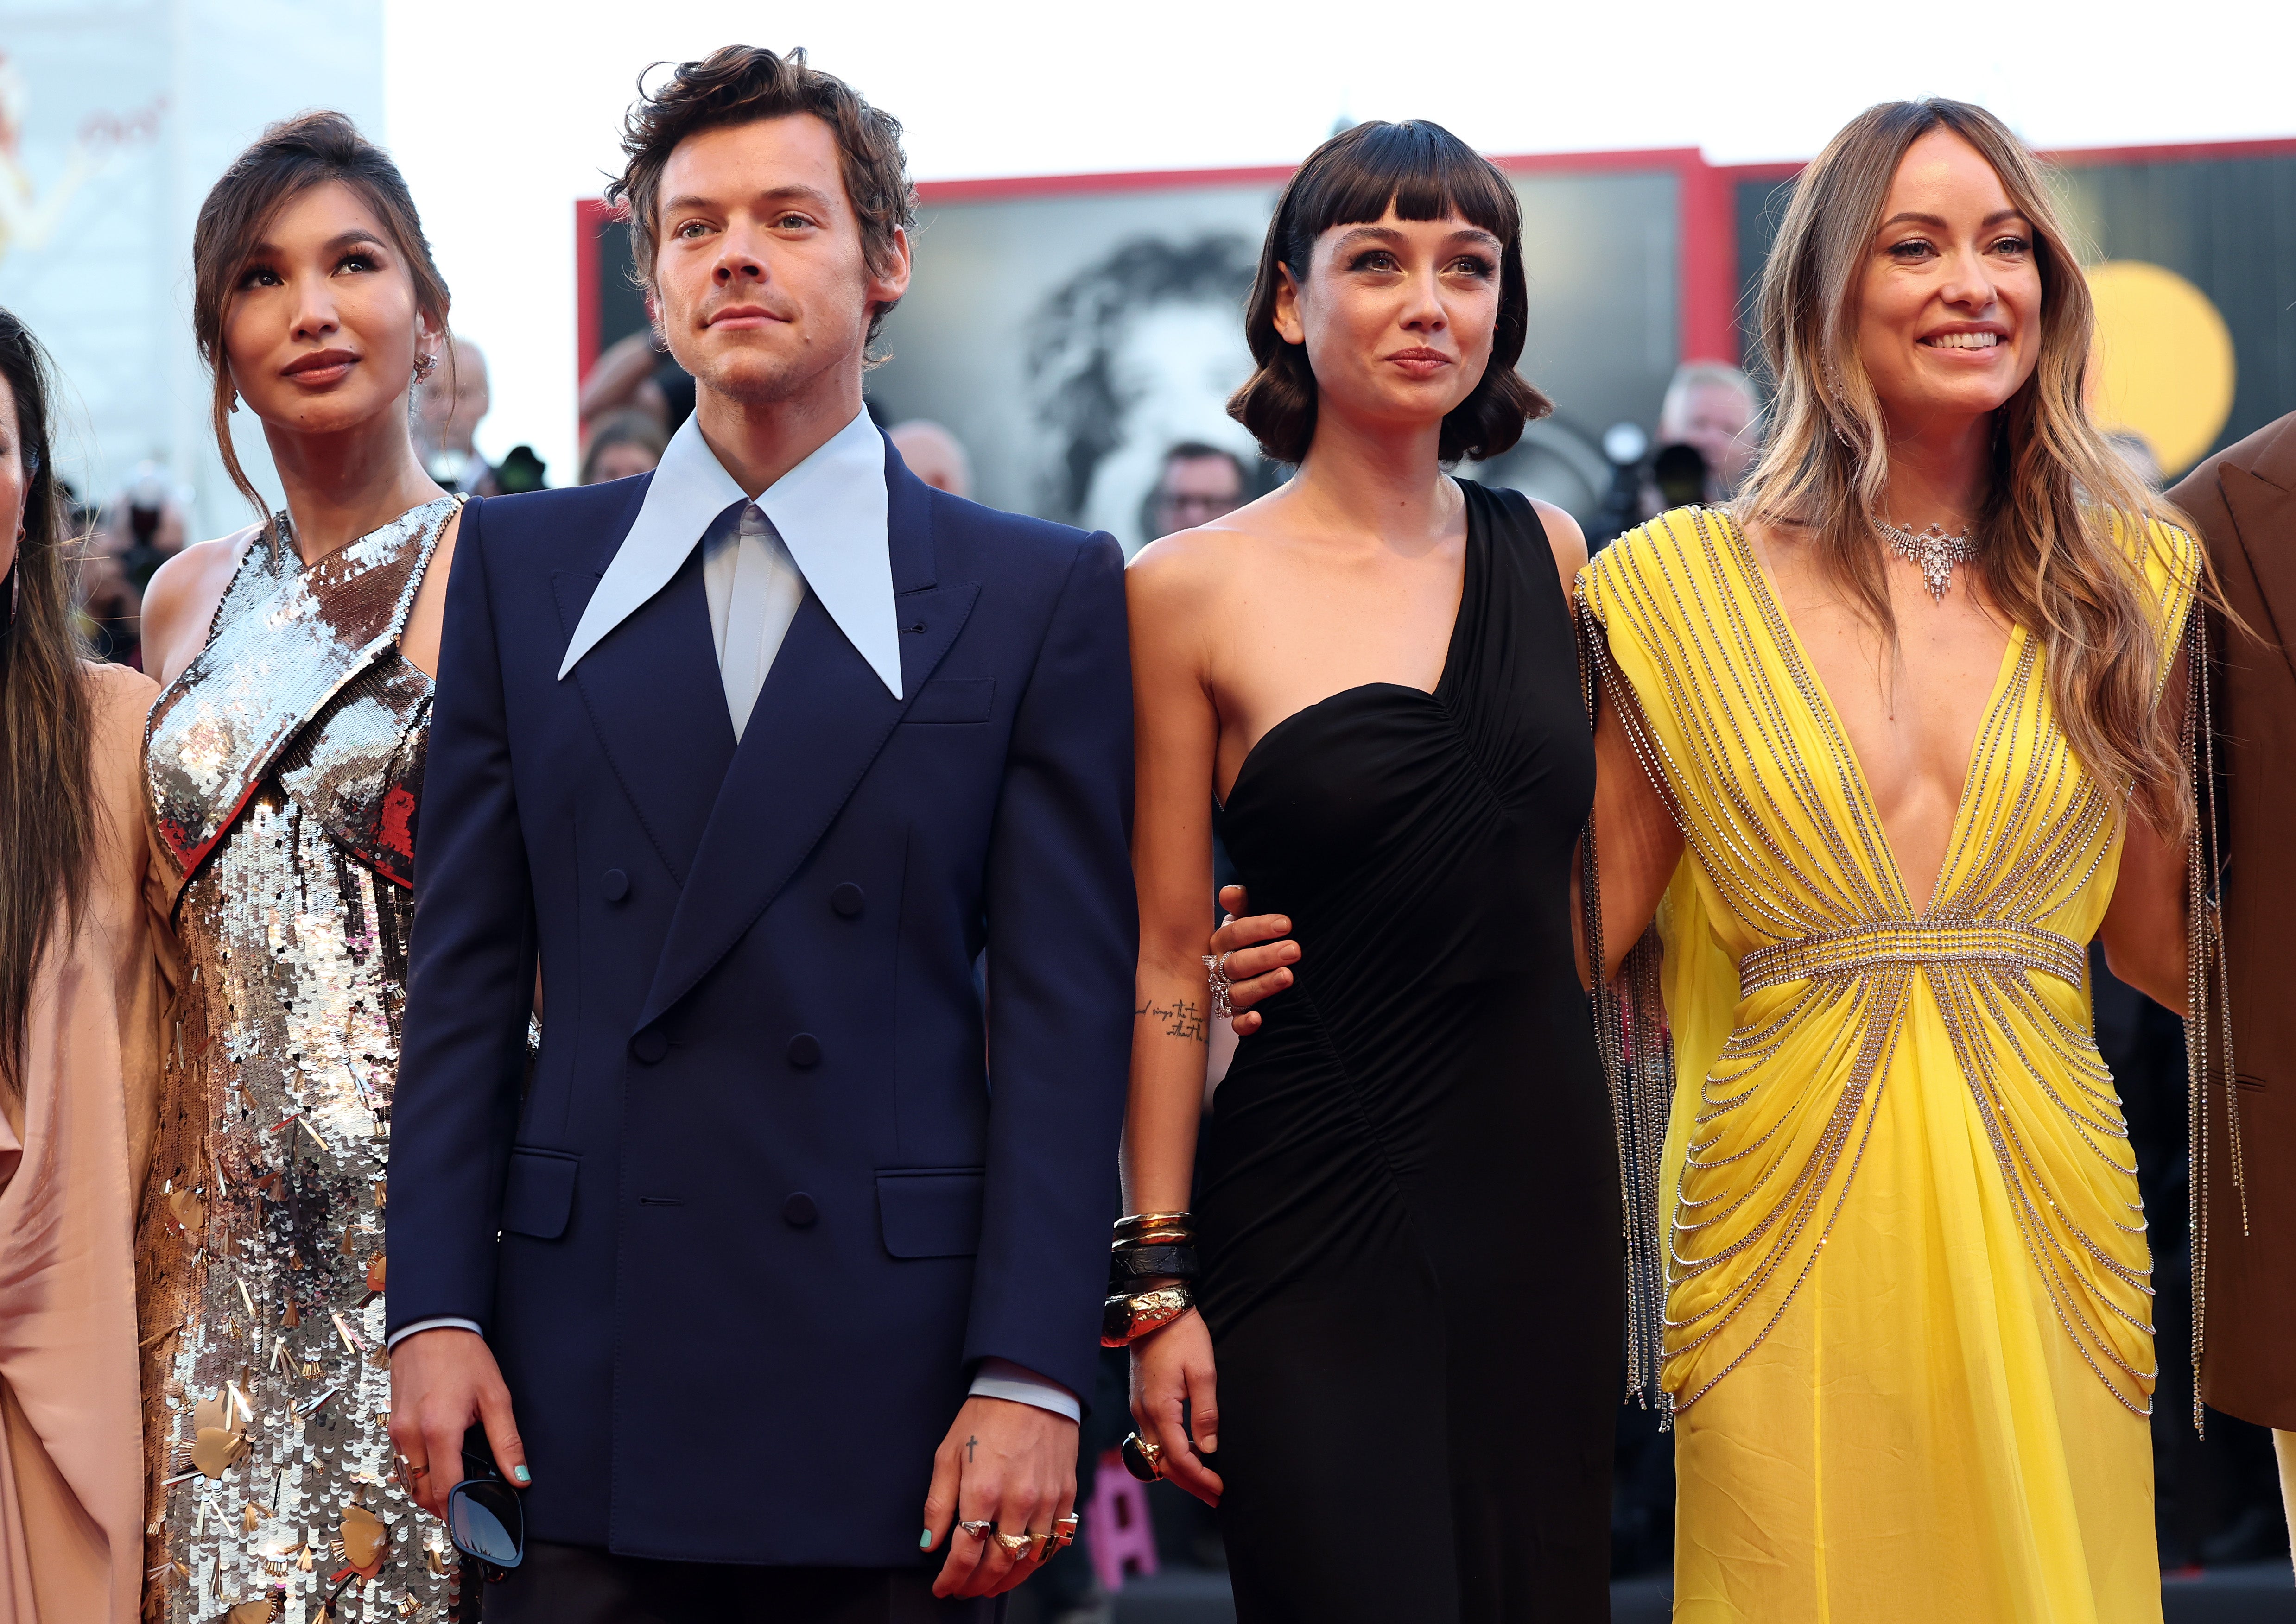 <p>The promotion for Olivia Wilde’s film ‘Don’t Worry Darling’ has been turned into a media circus</p>